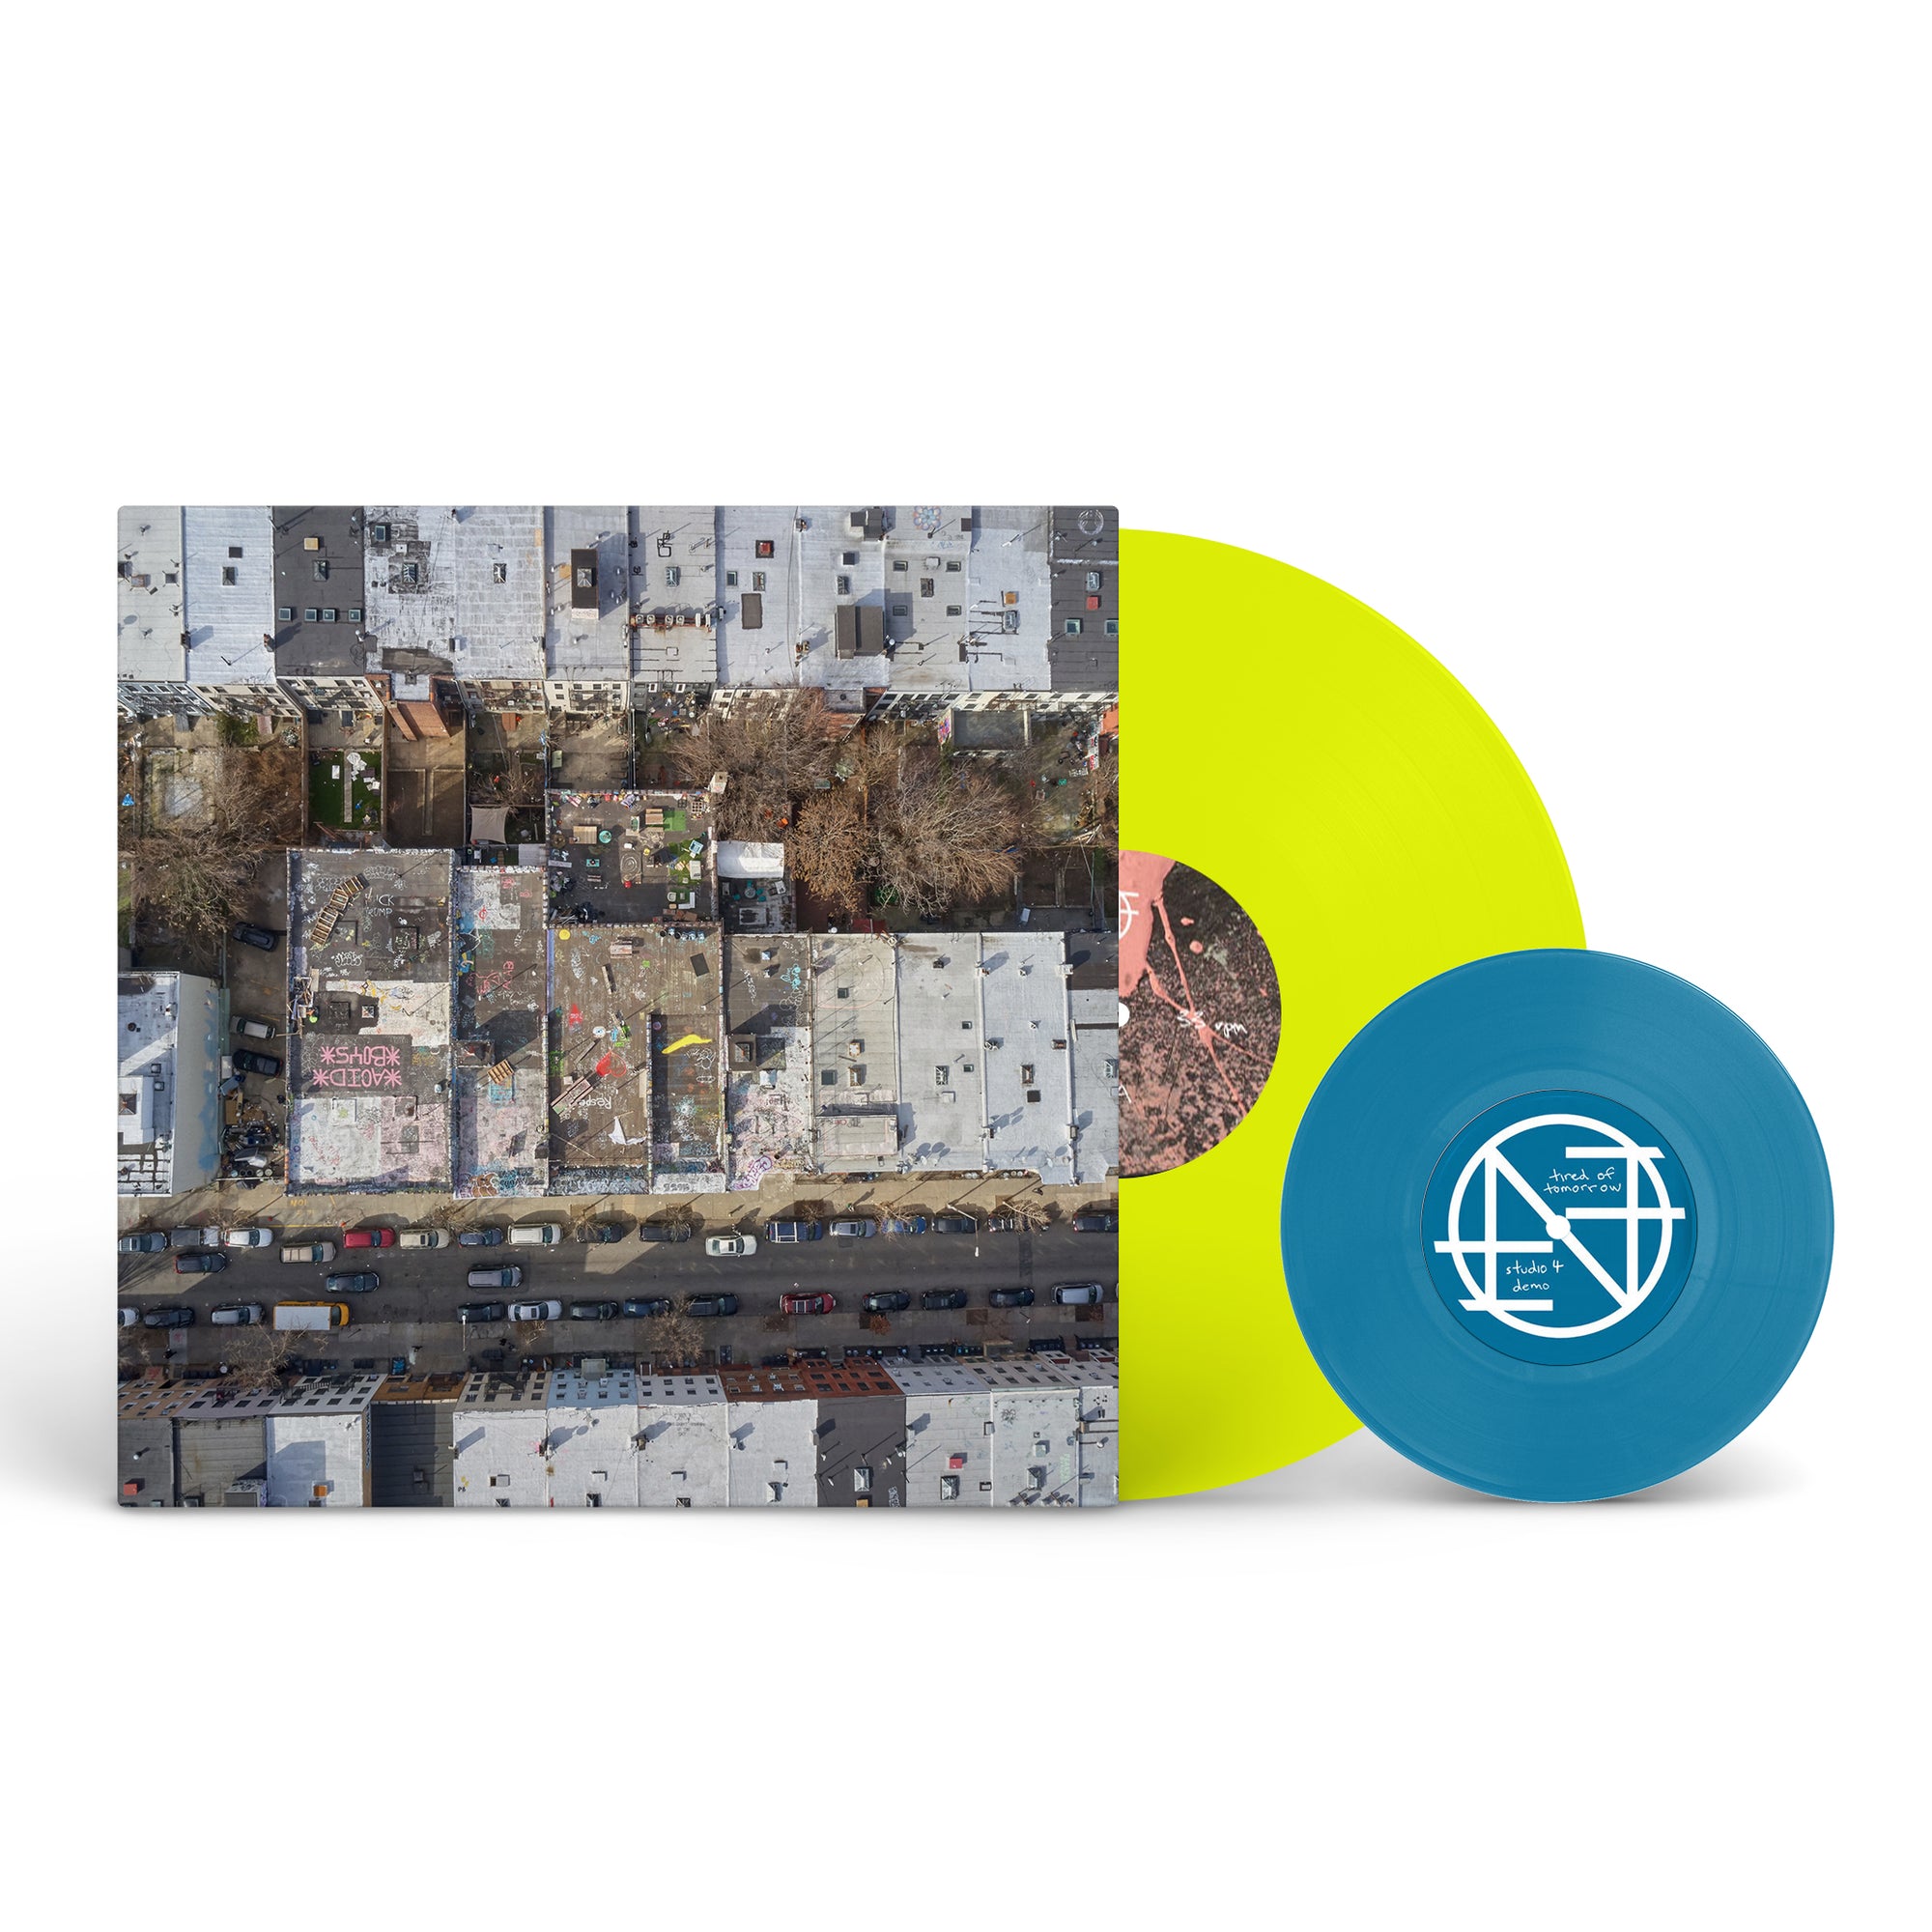 NOTHING "Tired Of Tomorrow - DLX 5 Year Anniversary Edition" LP + Flexi